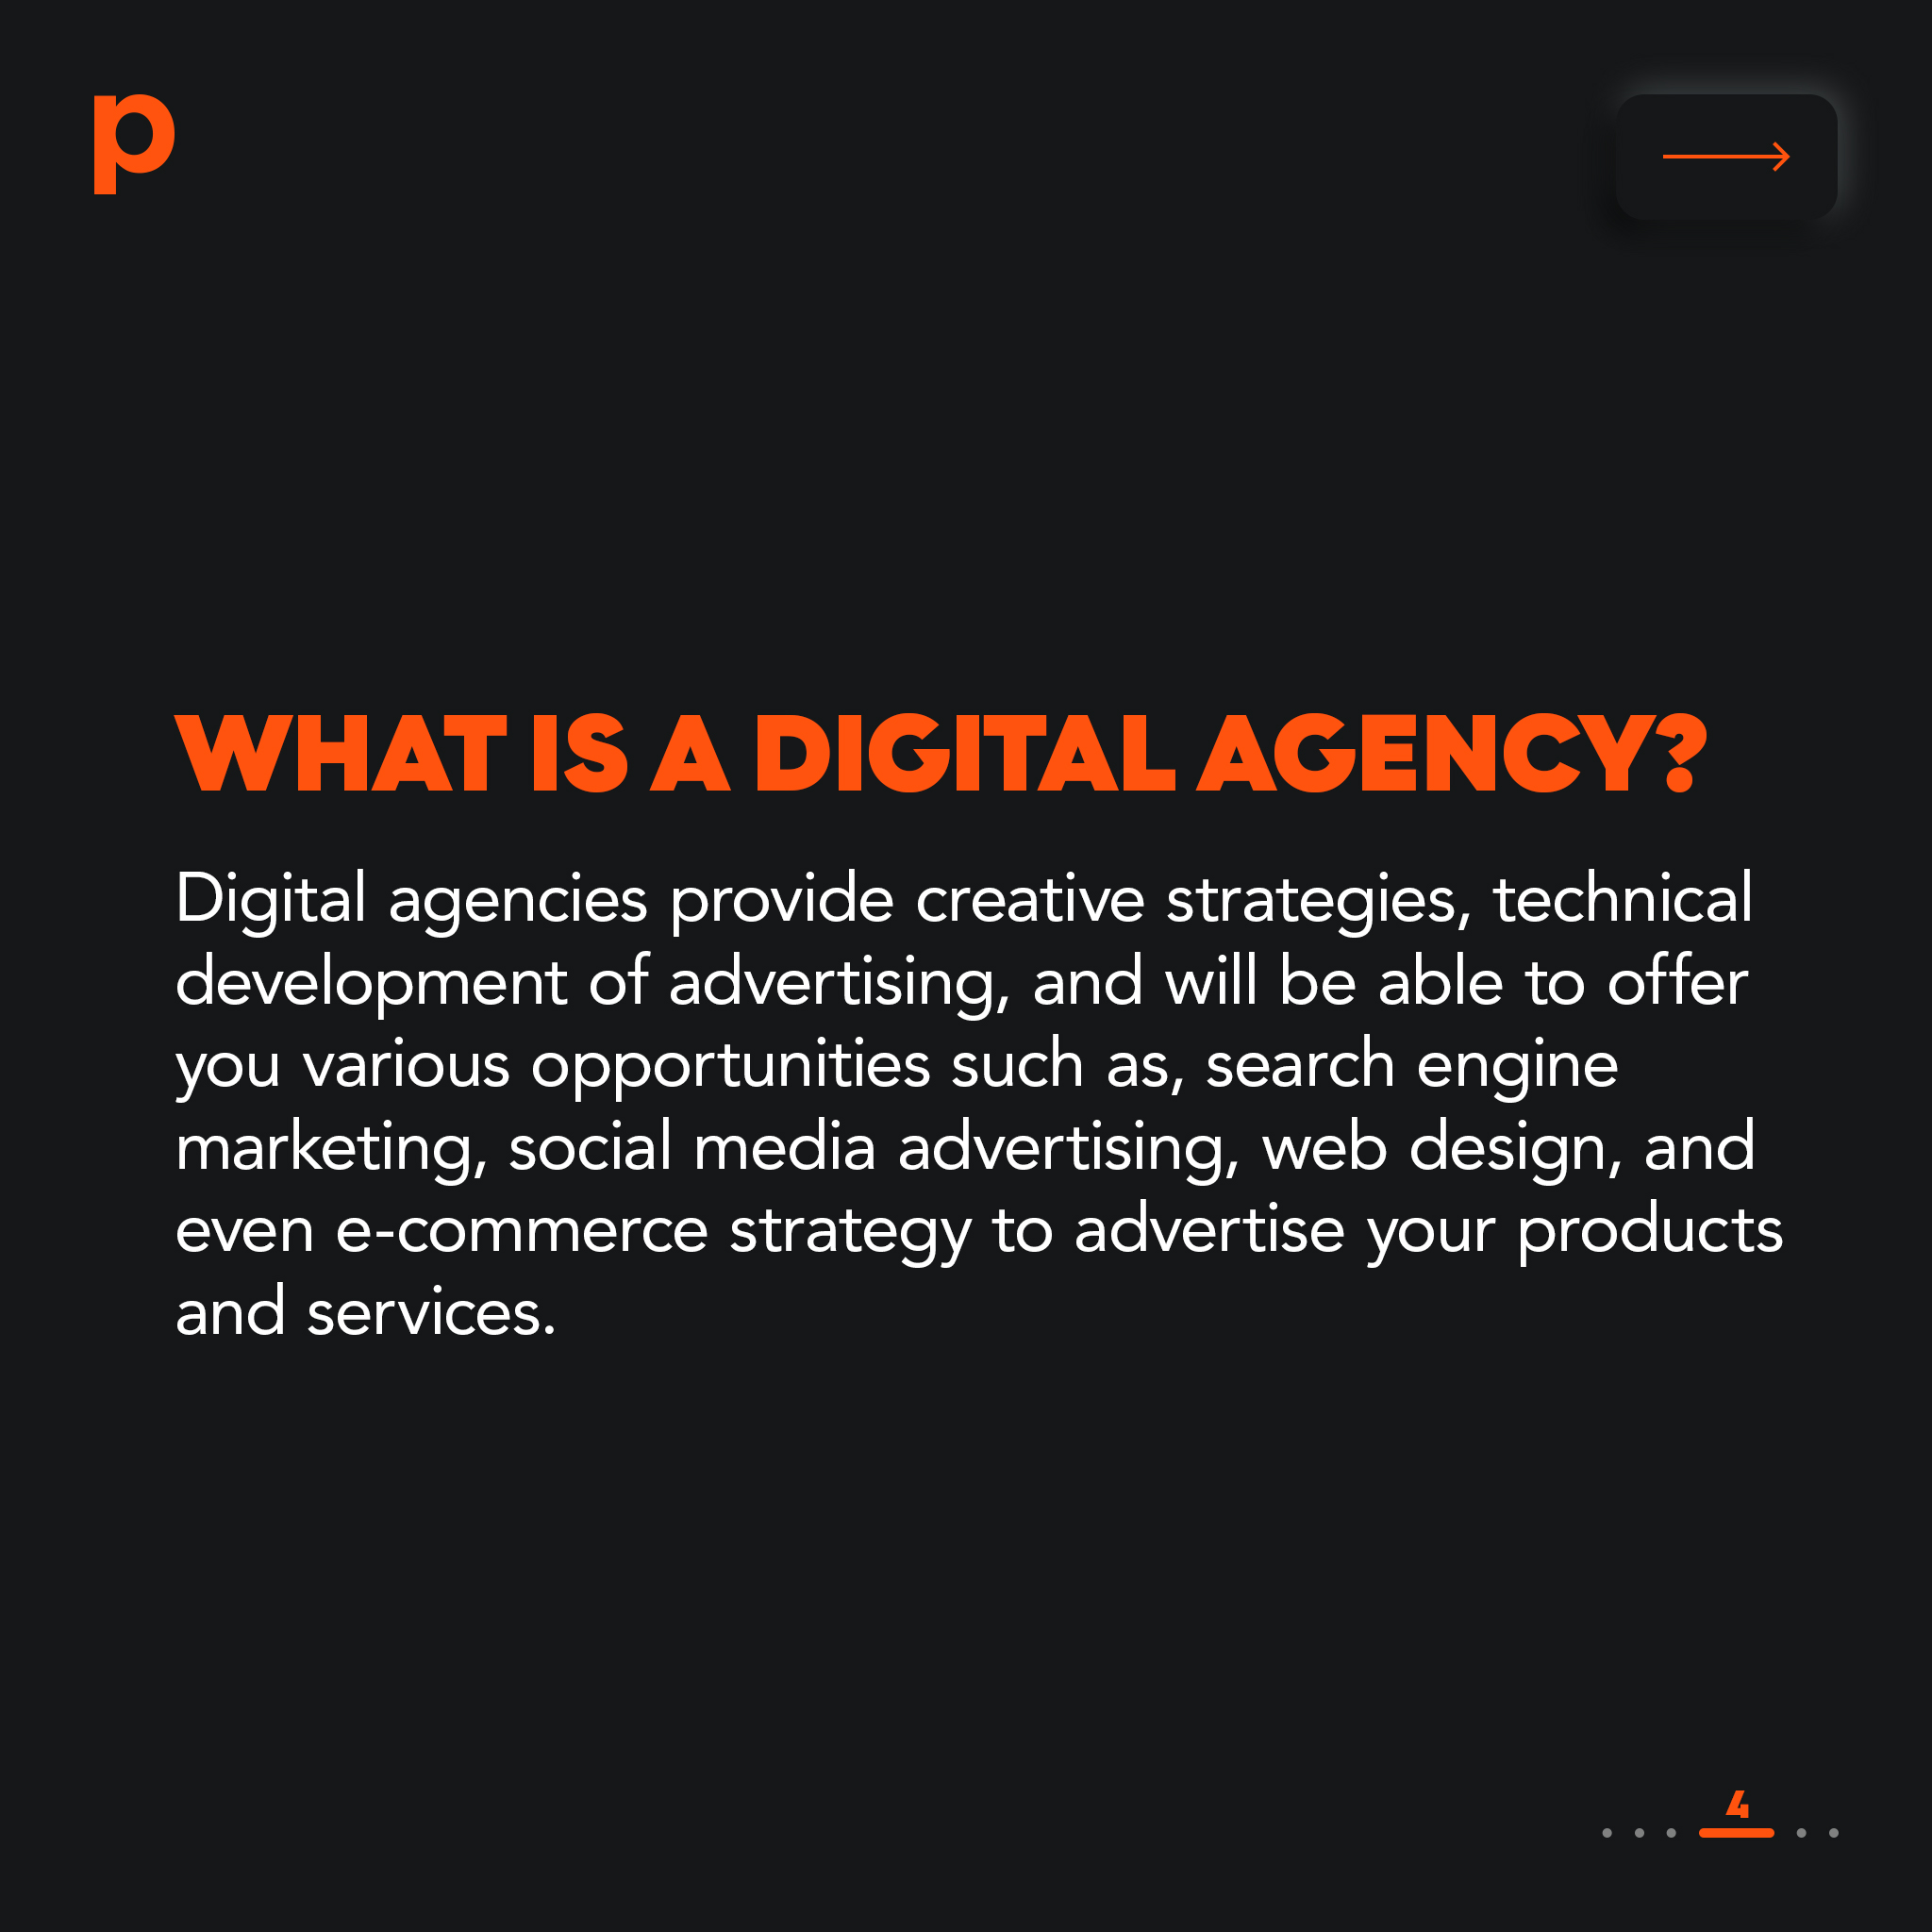 Creative Agencies, Digital Agencies, What are the differences between them?